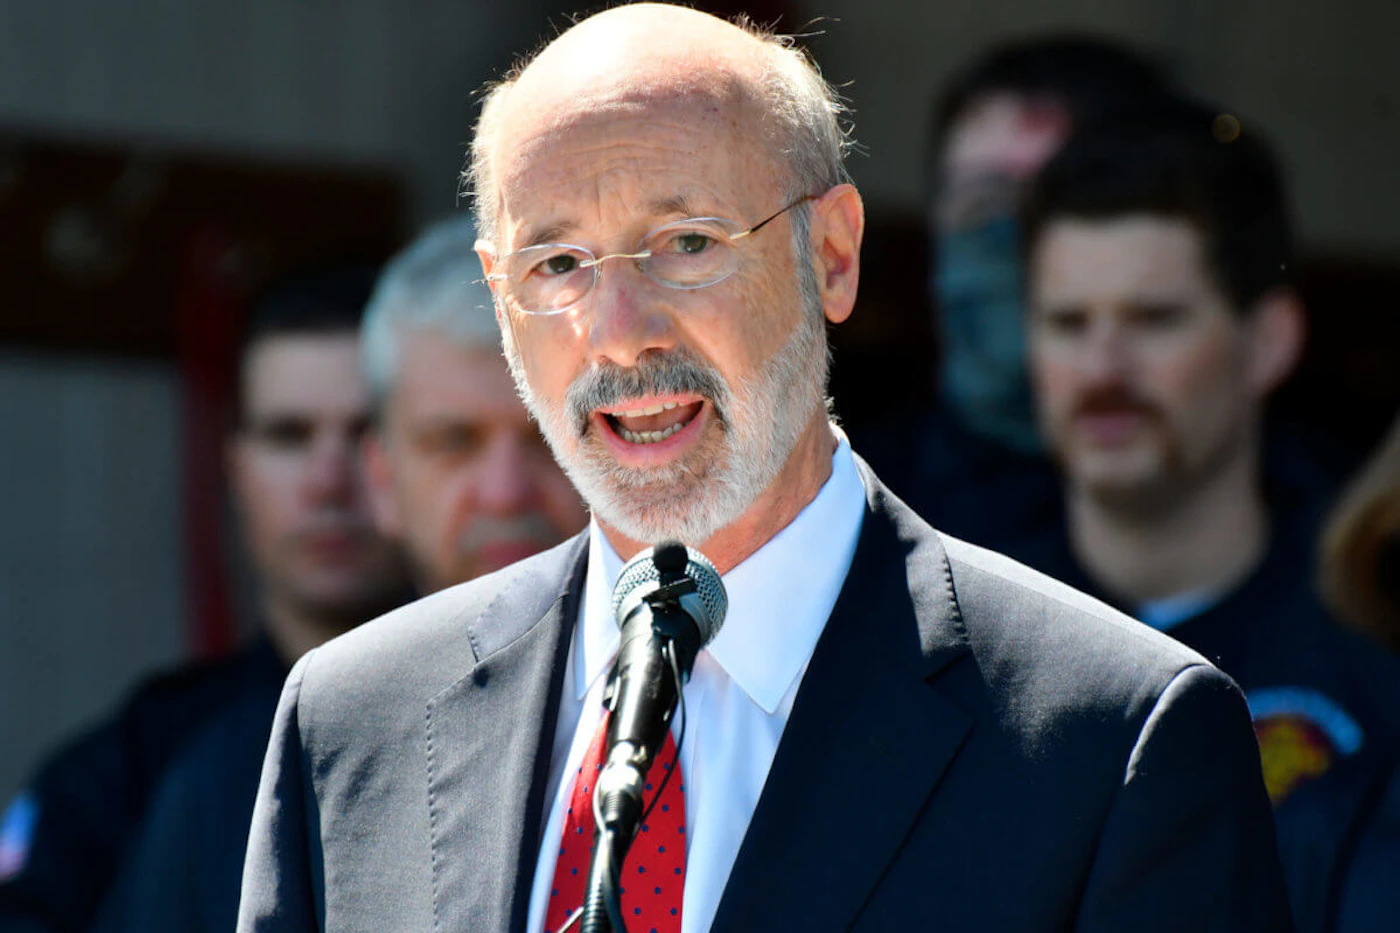 Gov. Tom Wolf speaks at an event in Mechanicsburg, Pa.  Beyond the local races on ballots, Pennsylvania’s primary election will determine the future of a governor’s authority during disaster declarations. Voters statewide Tuesday, May 18 will decide four separate ballot questions, including two on whether to give state lawmakers much more power over disaster declarations. (AP Photo/Marc Levy)